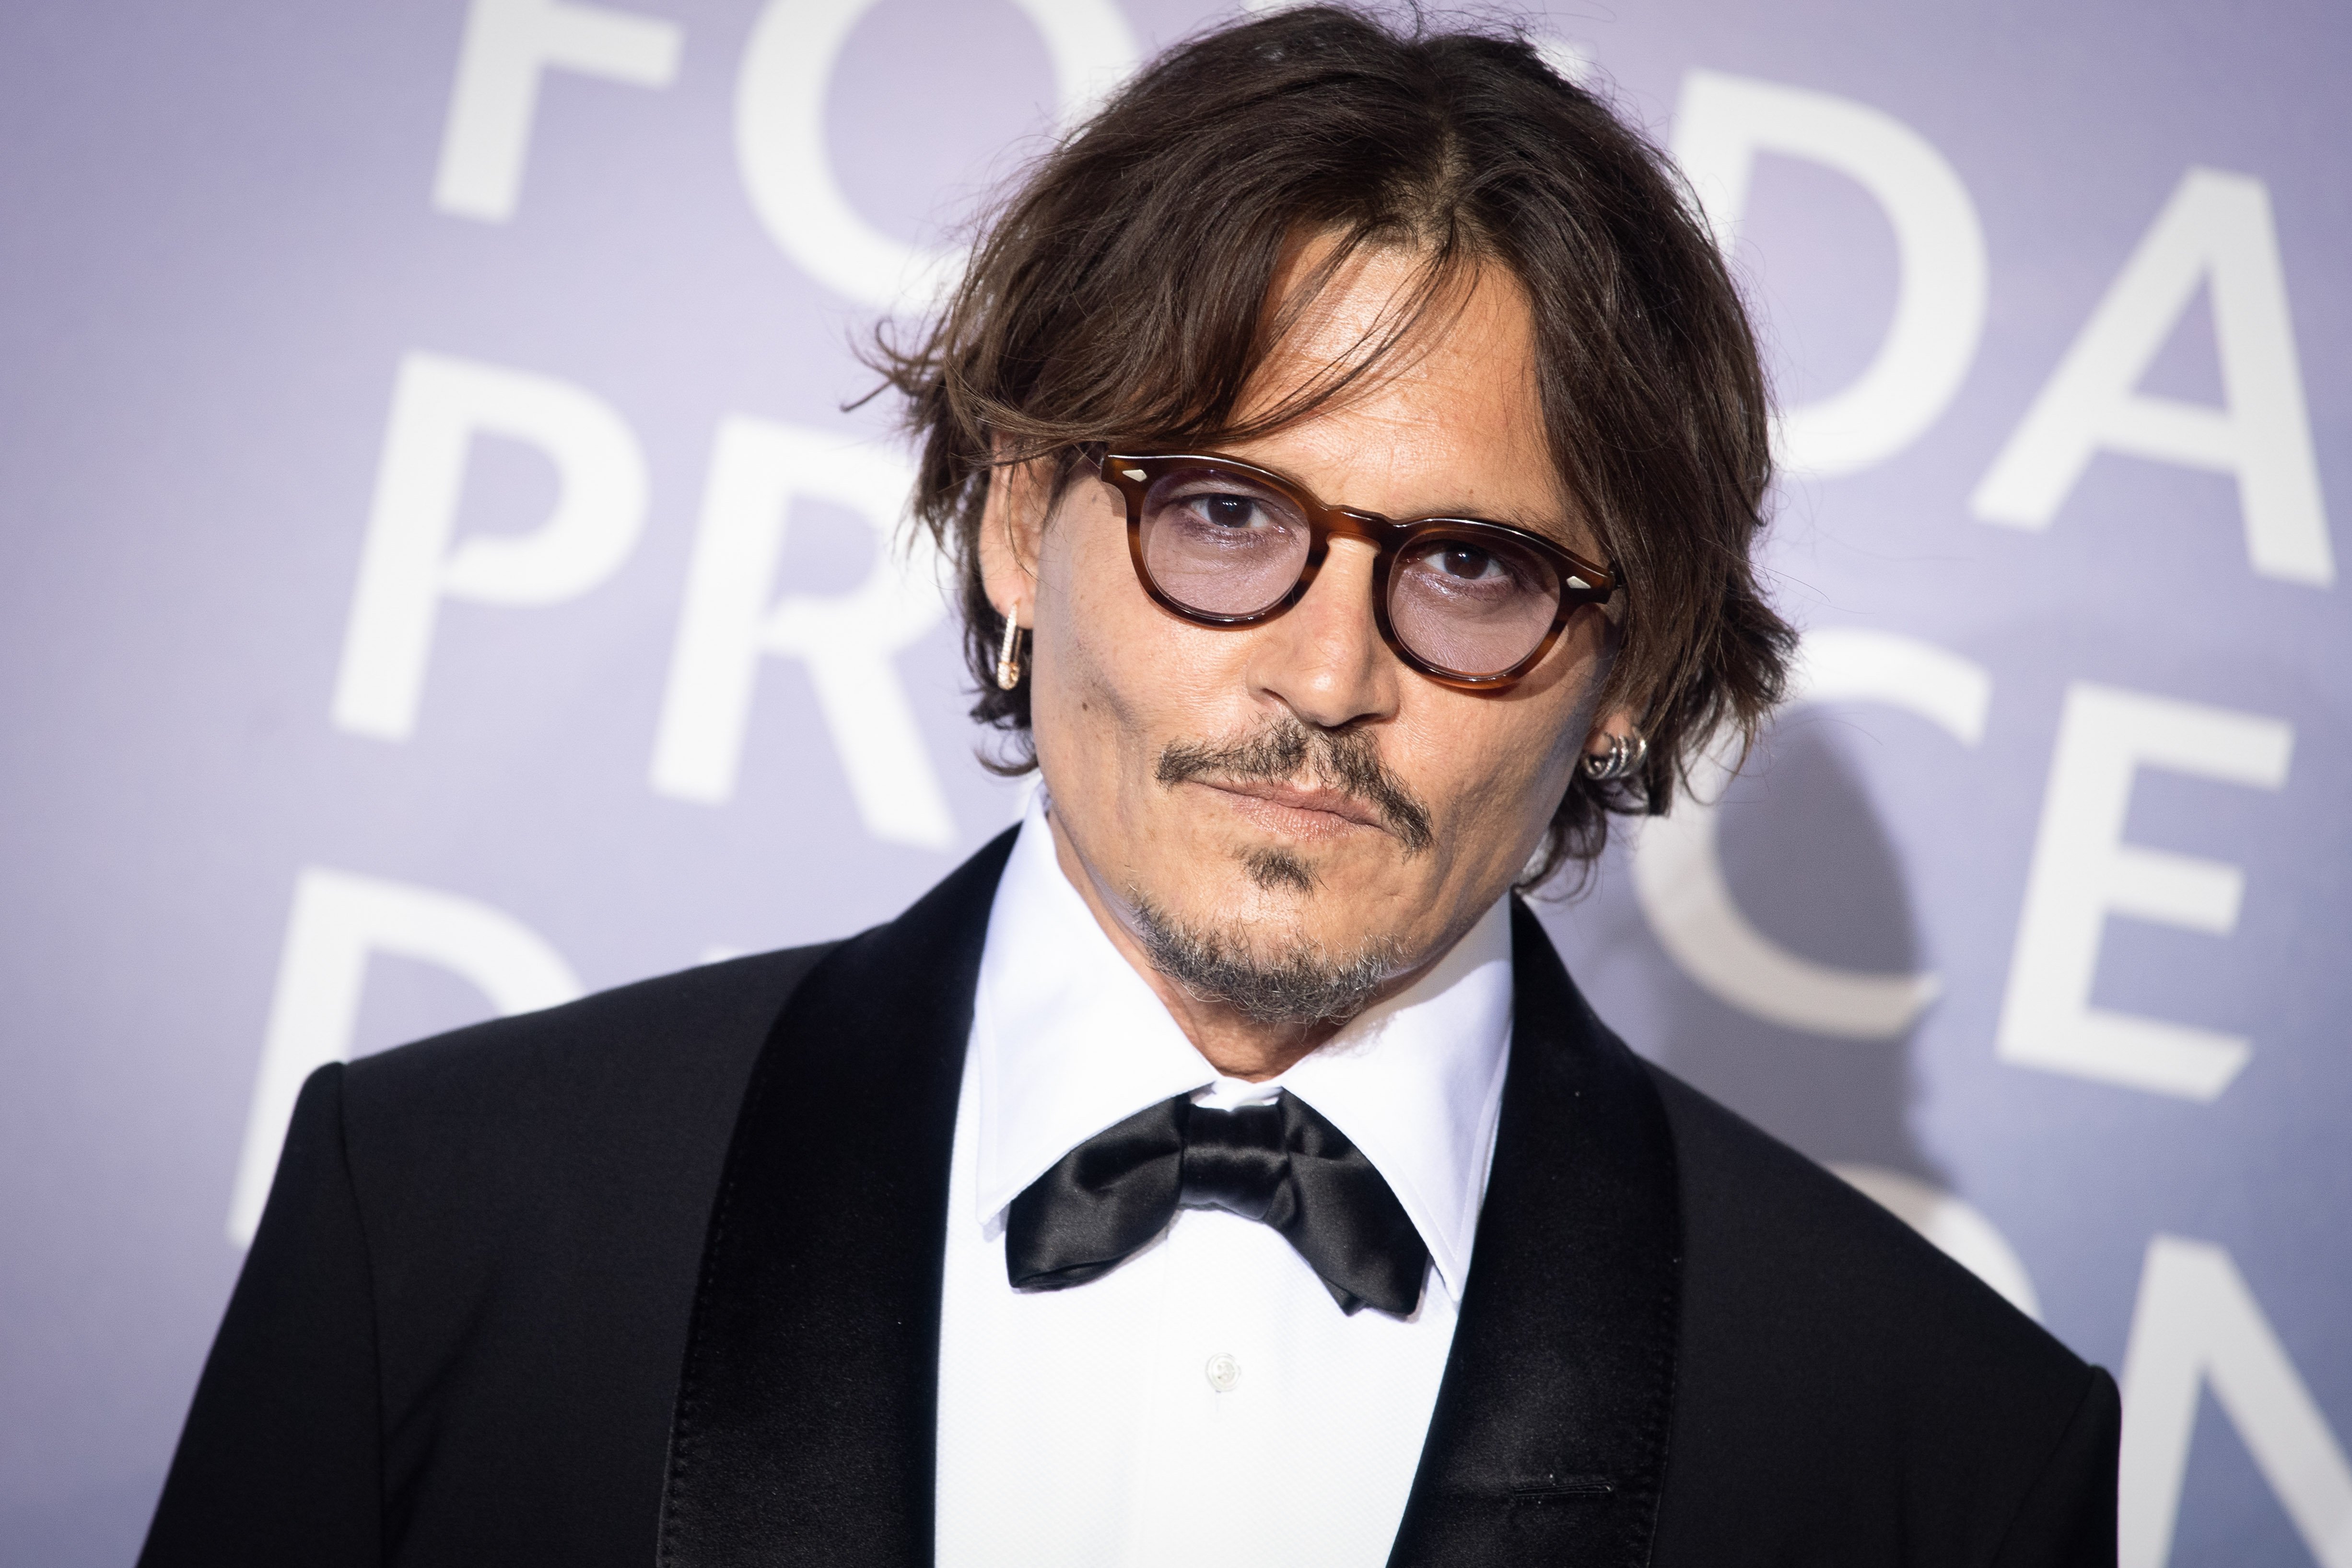 Johnny Depp poses at an event while wearing a black suit and white shirt.